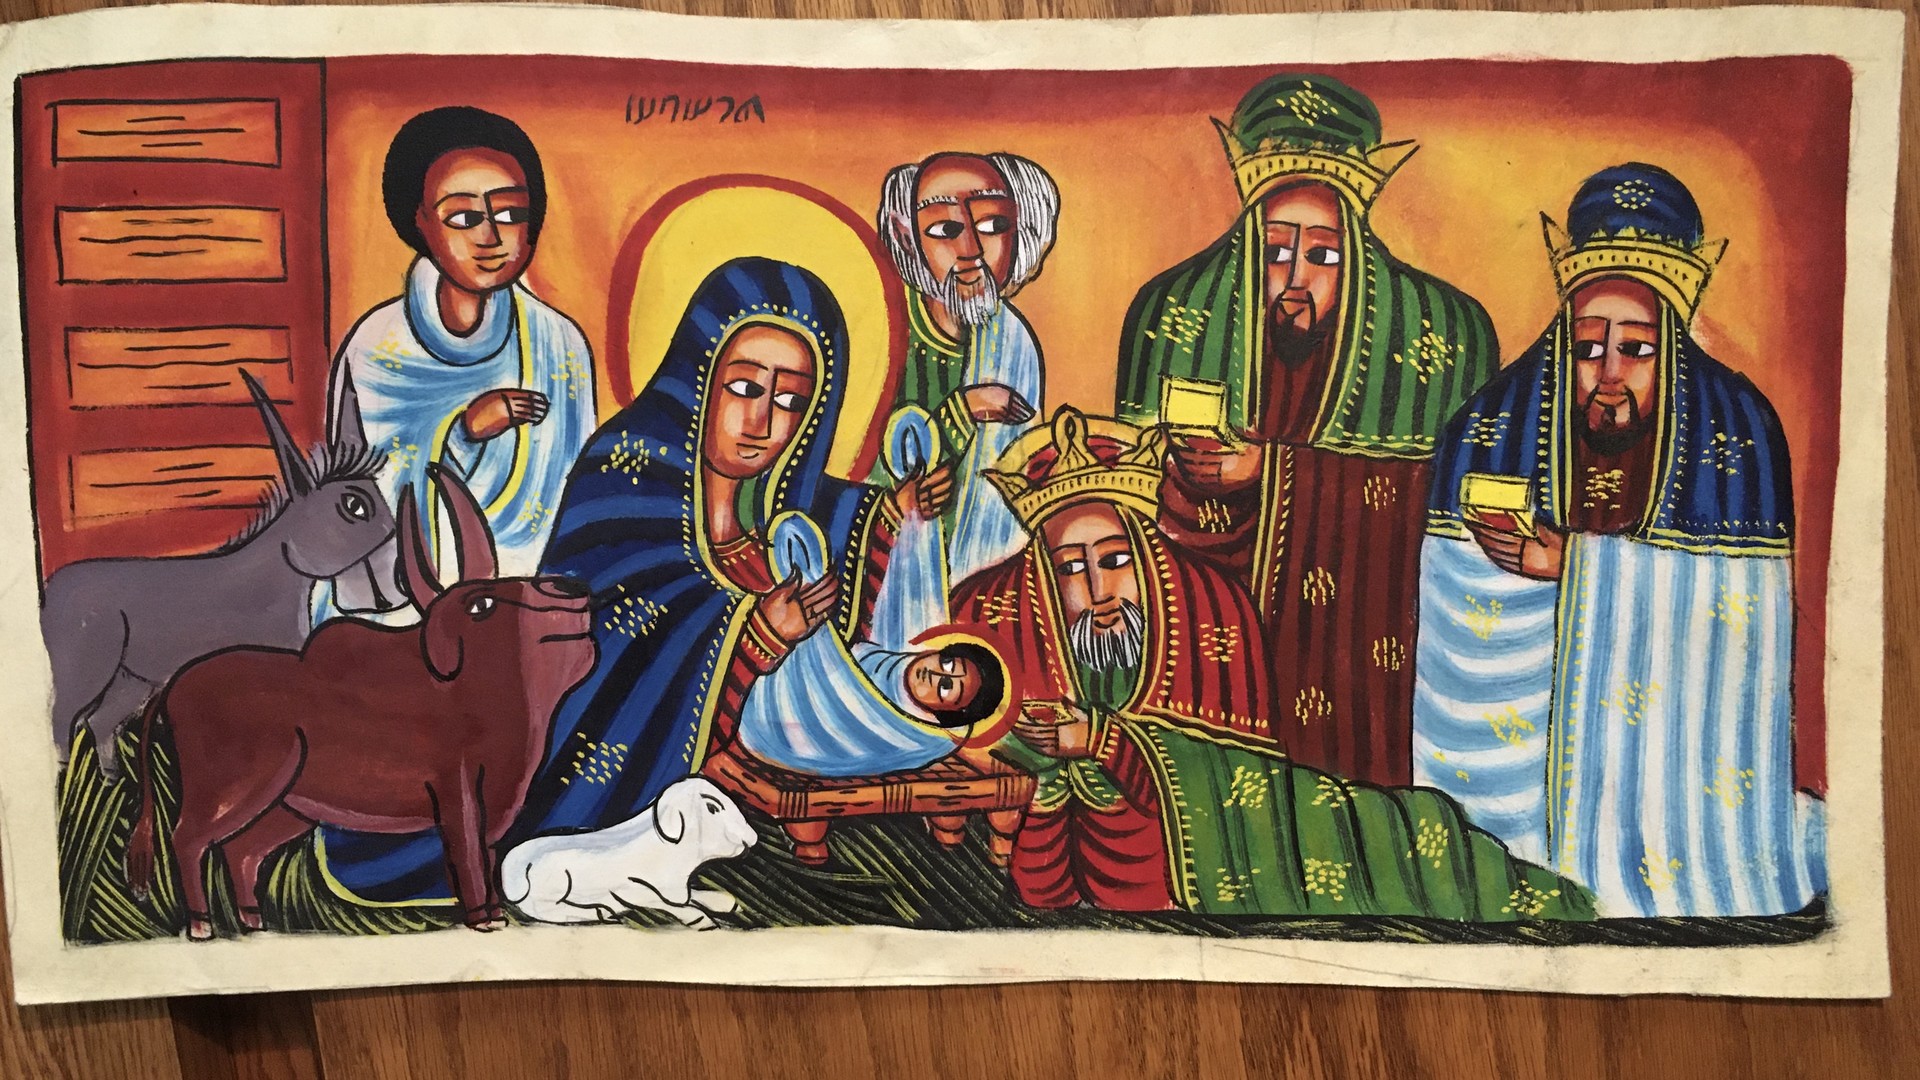 This nativity scene from Ethiopia is painted on goat skin.